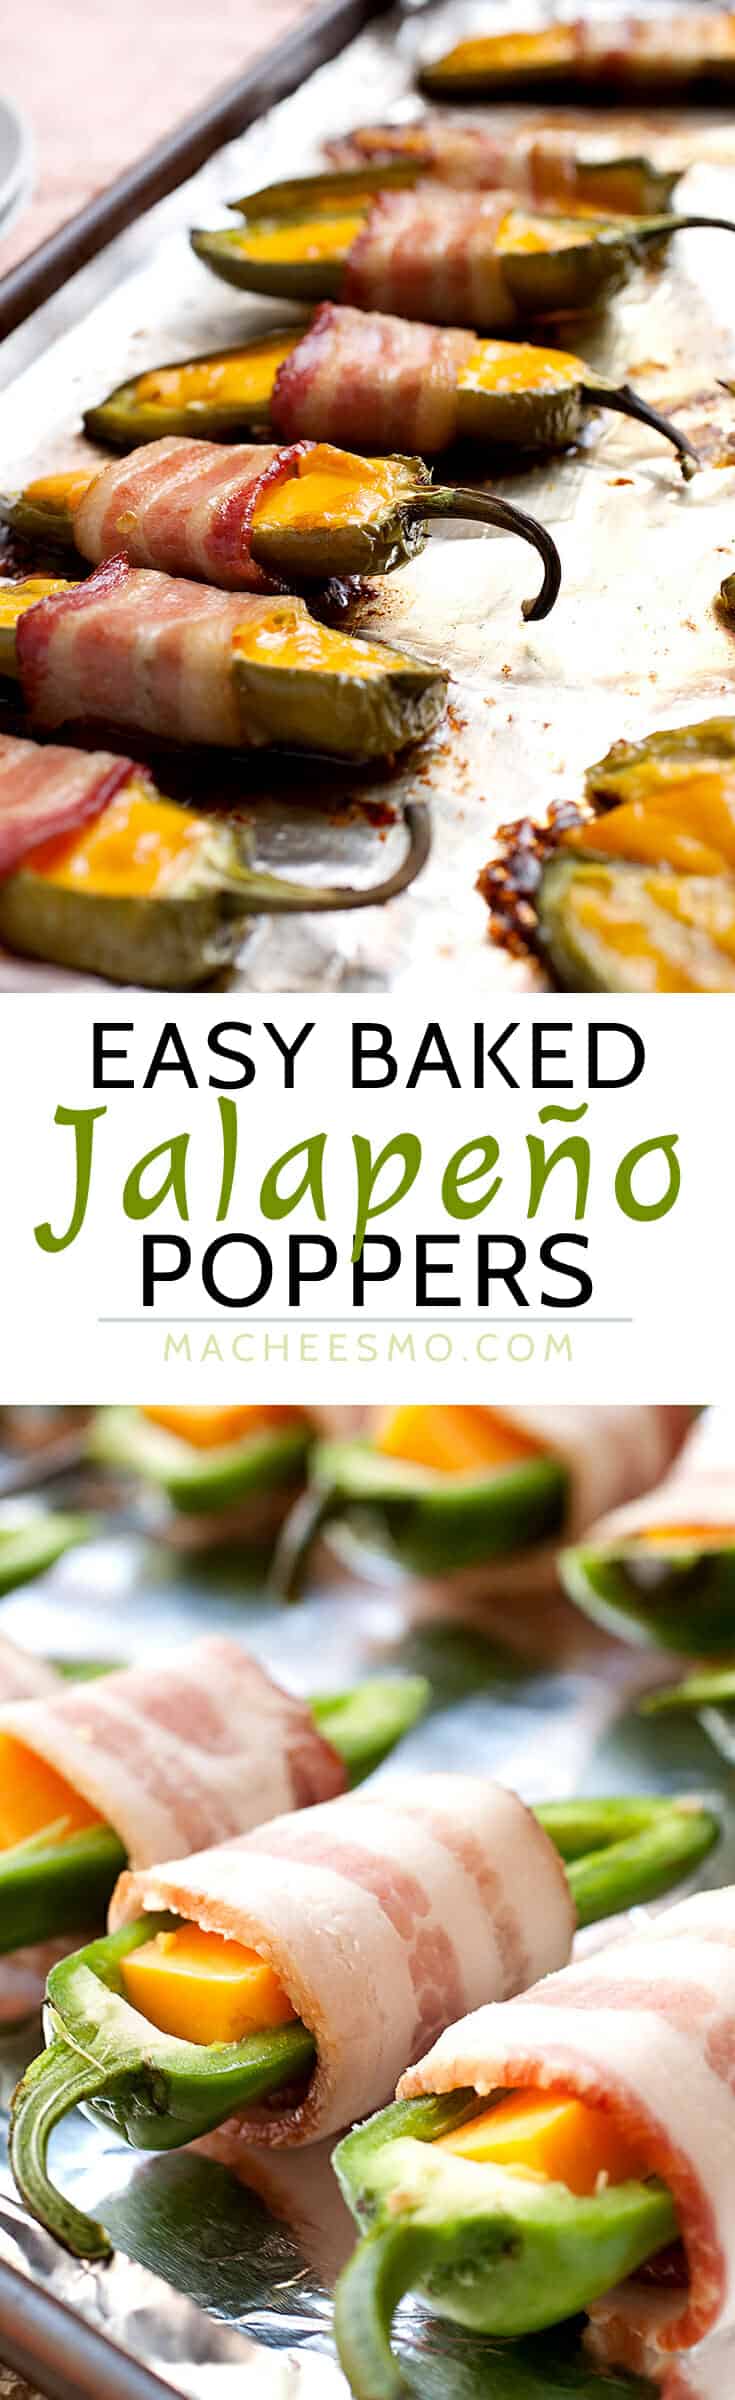 Three Ingredient Baked Jalapeño Poppers: These little guys are easy to make and SO addictive. Make a big batch of these for your next game day celebration and try not to eat them all yourself! | macheesmo.com